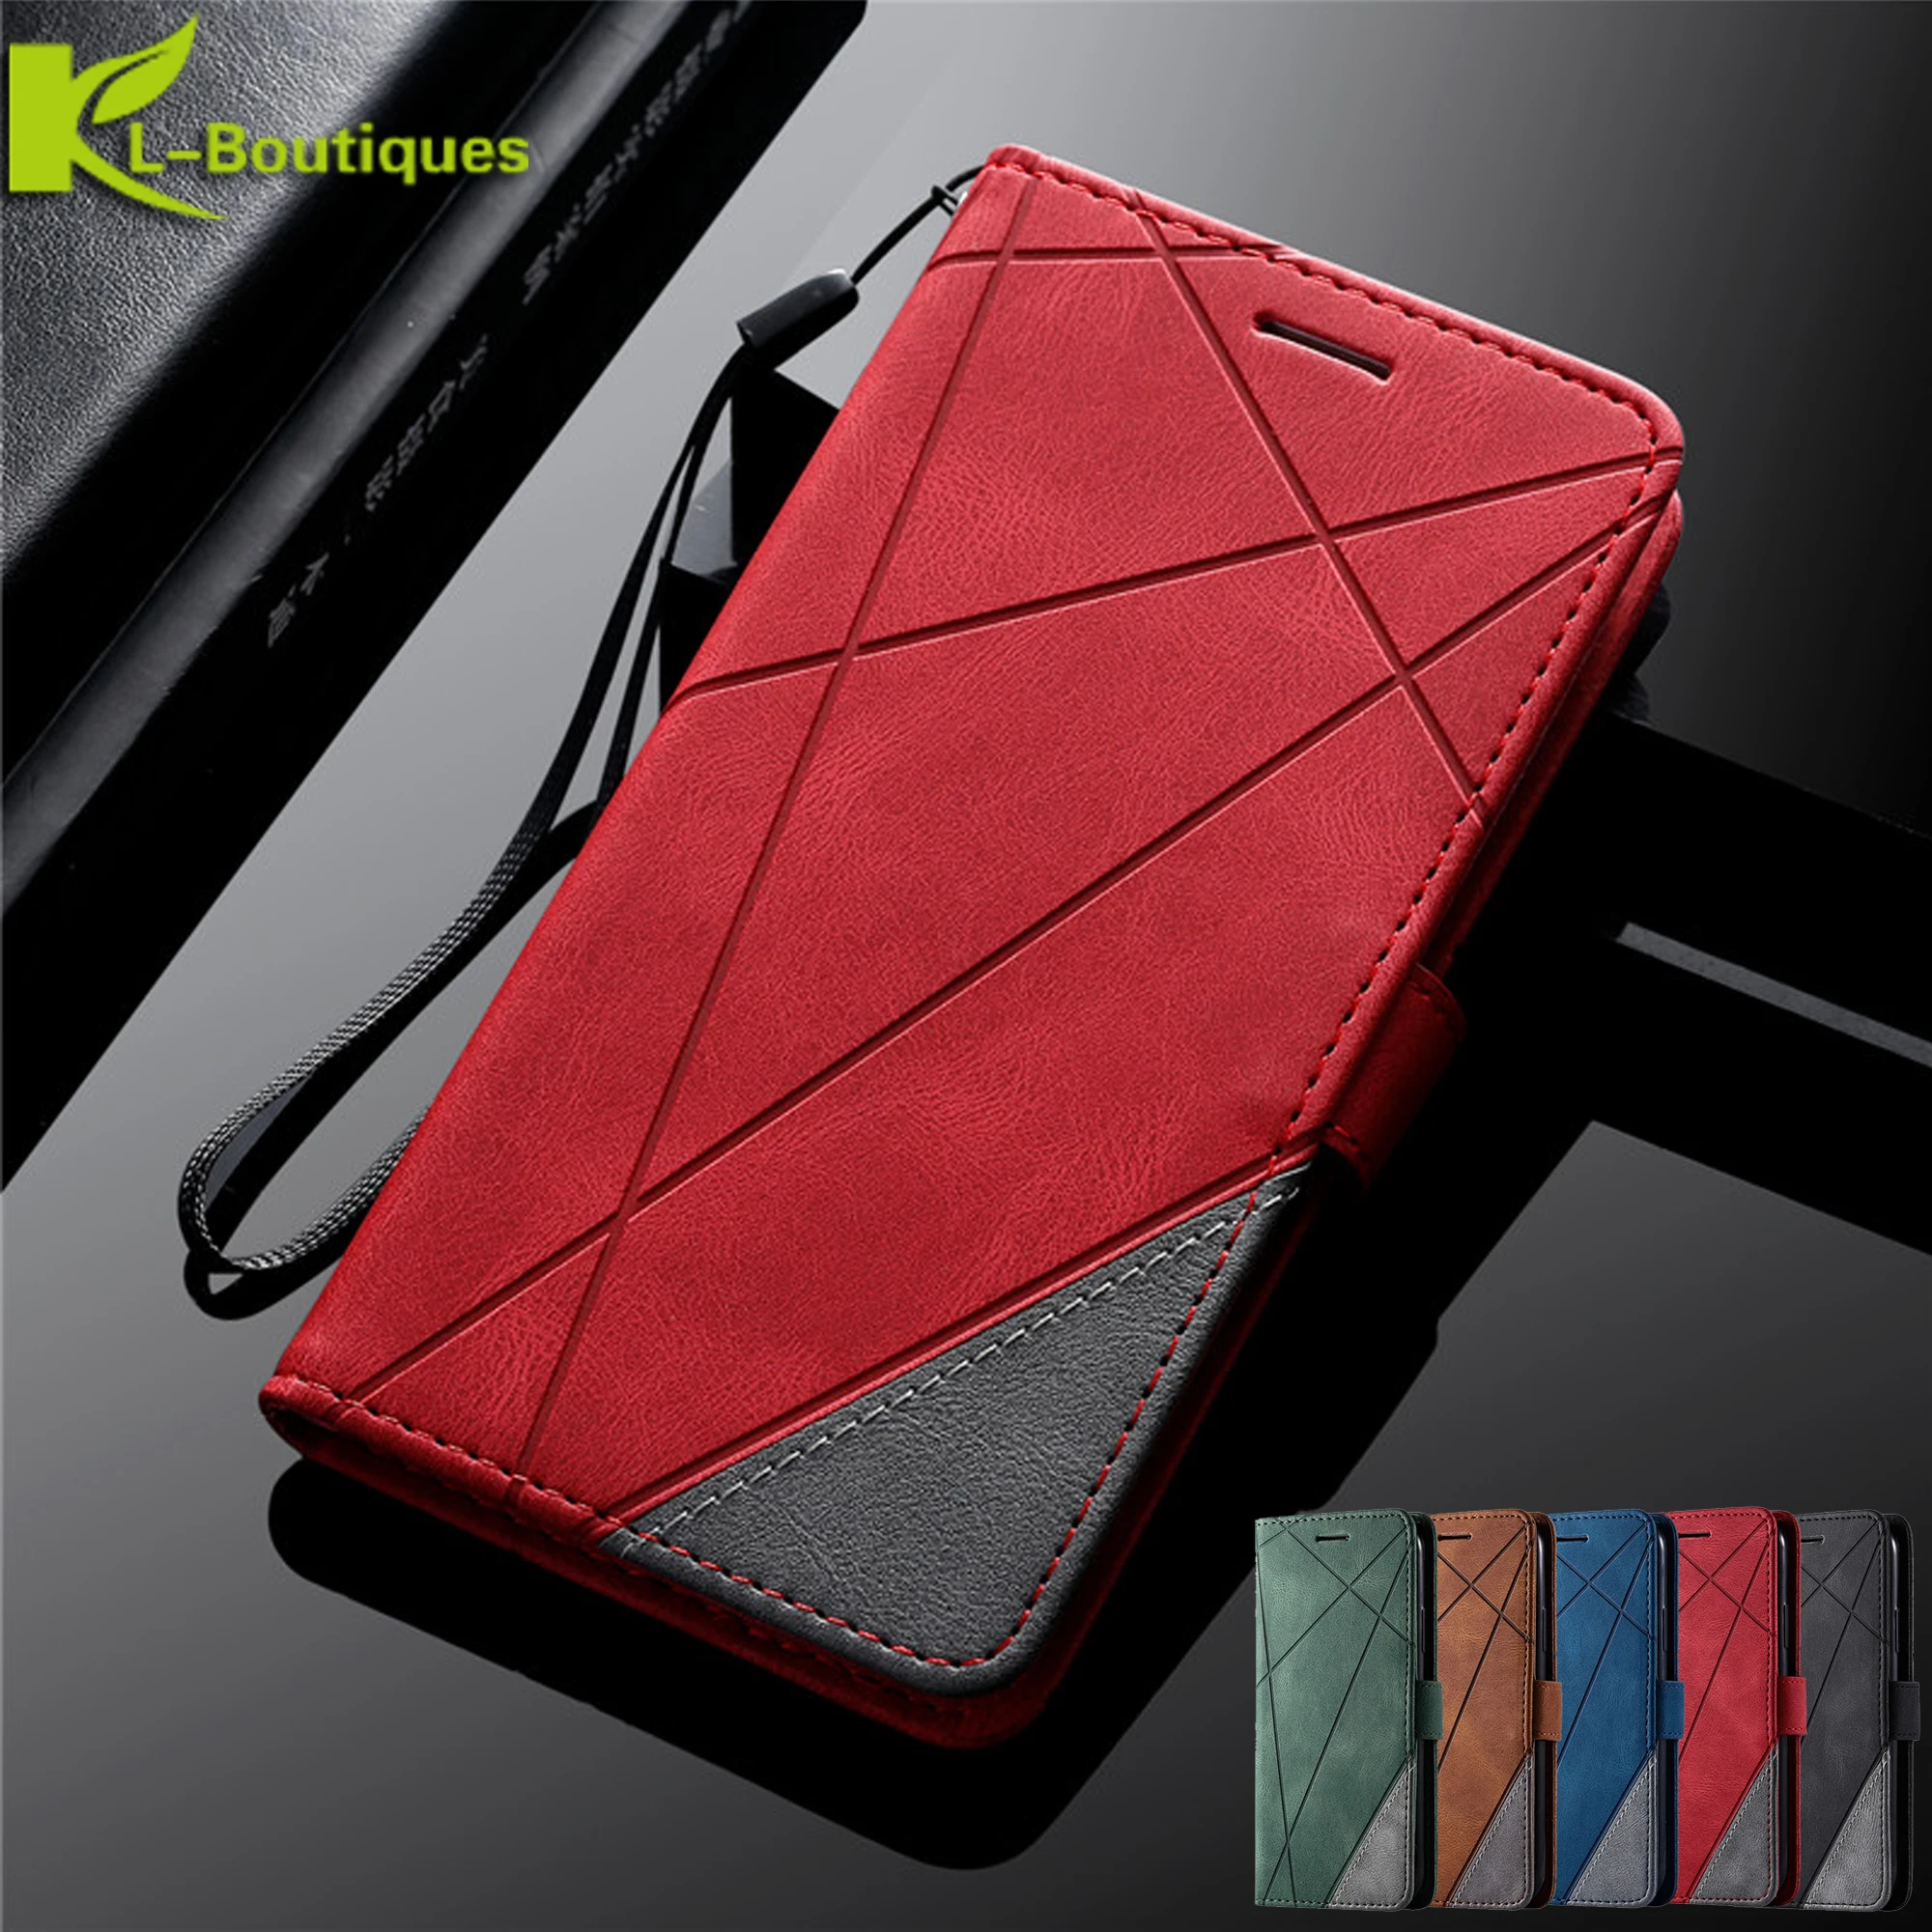 

Case on For Funda Samsung Galaxy A71 4G A715 SM-A715F Wallet Card Slot Coque For Samsung A71 5G UW A 71 A716 Flip Protect Cover